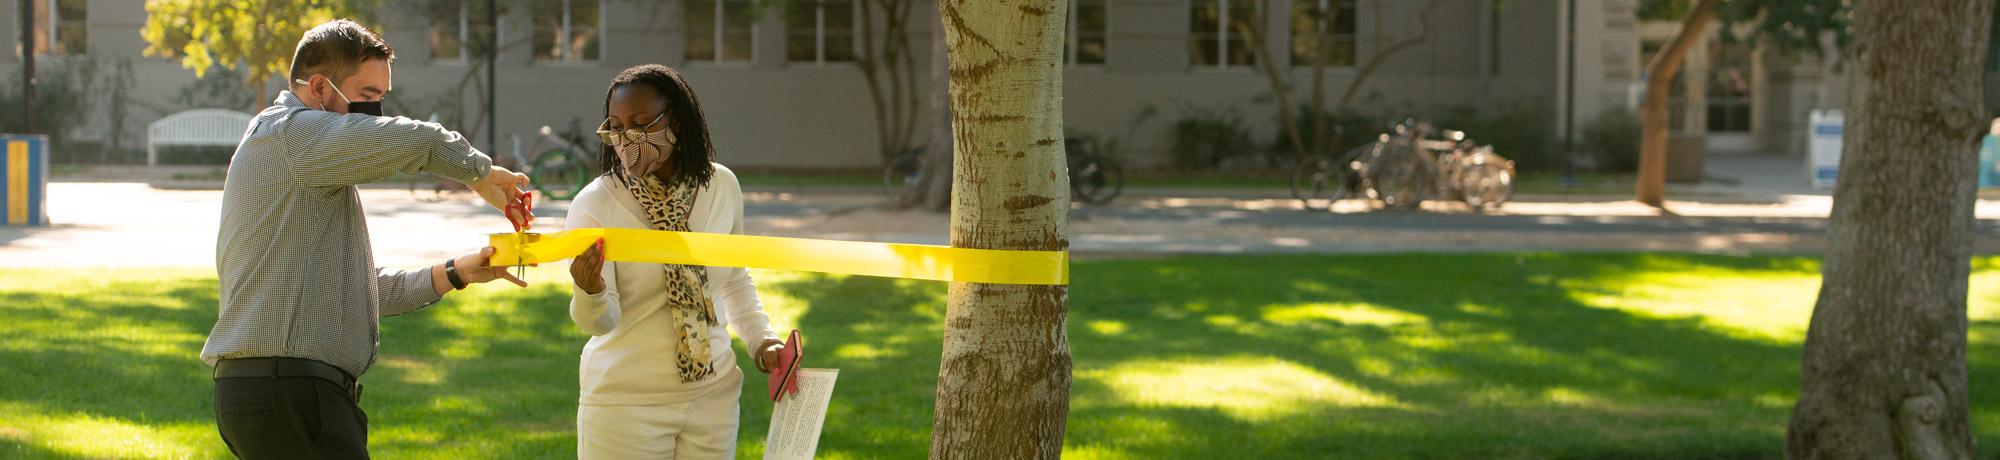 VSC staff tying yellow ribbons around trees on campus